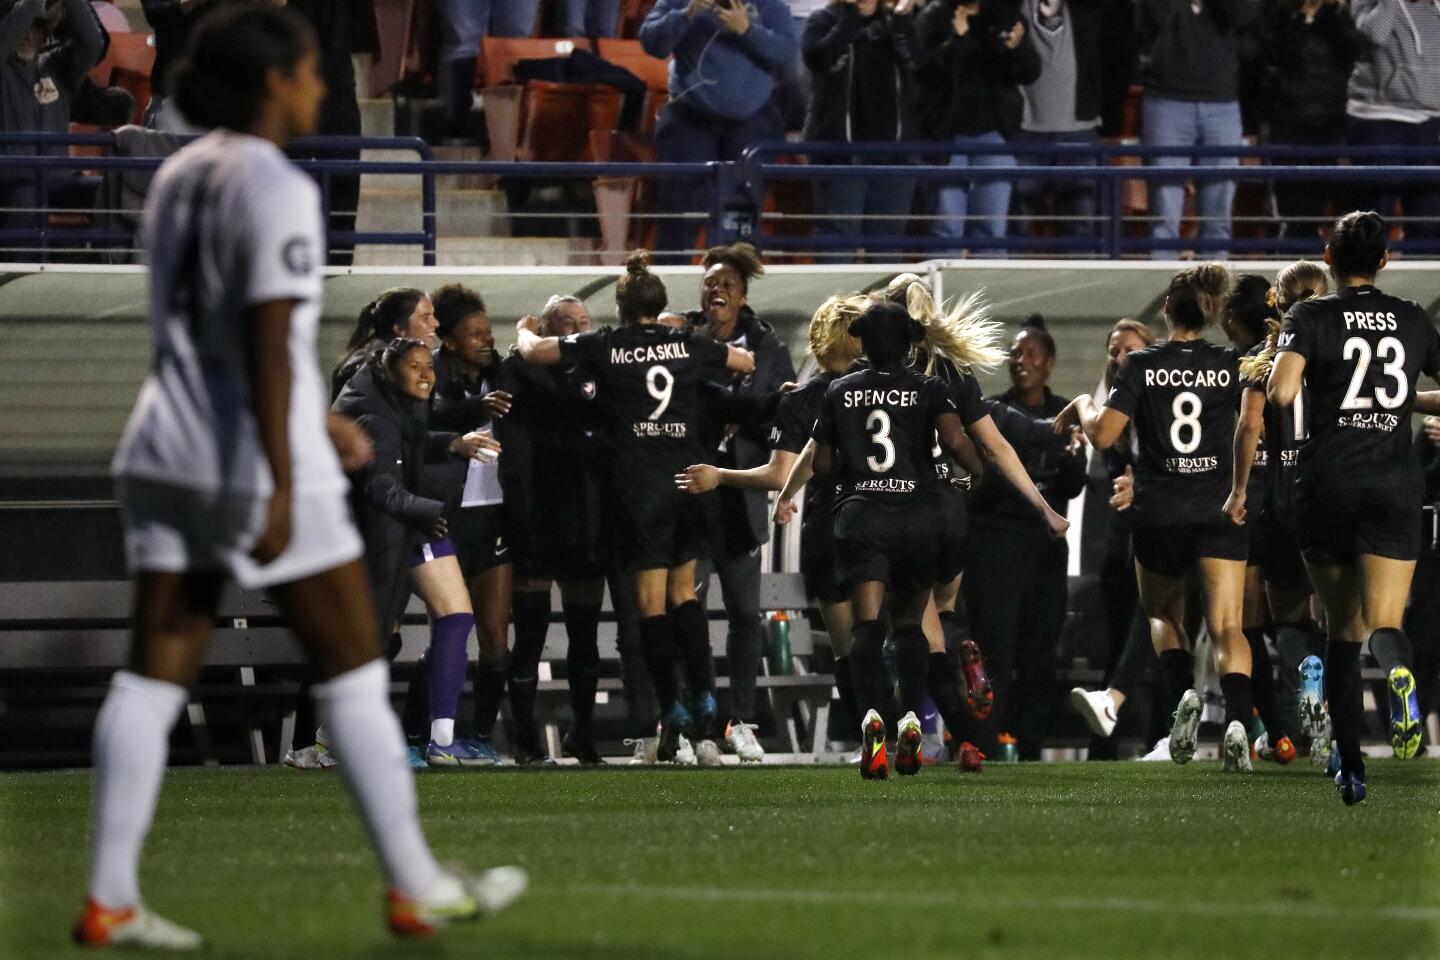 What Each NWSL Team's Home Stadium Is - Girls Soccer Network